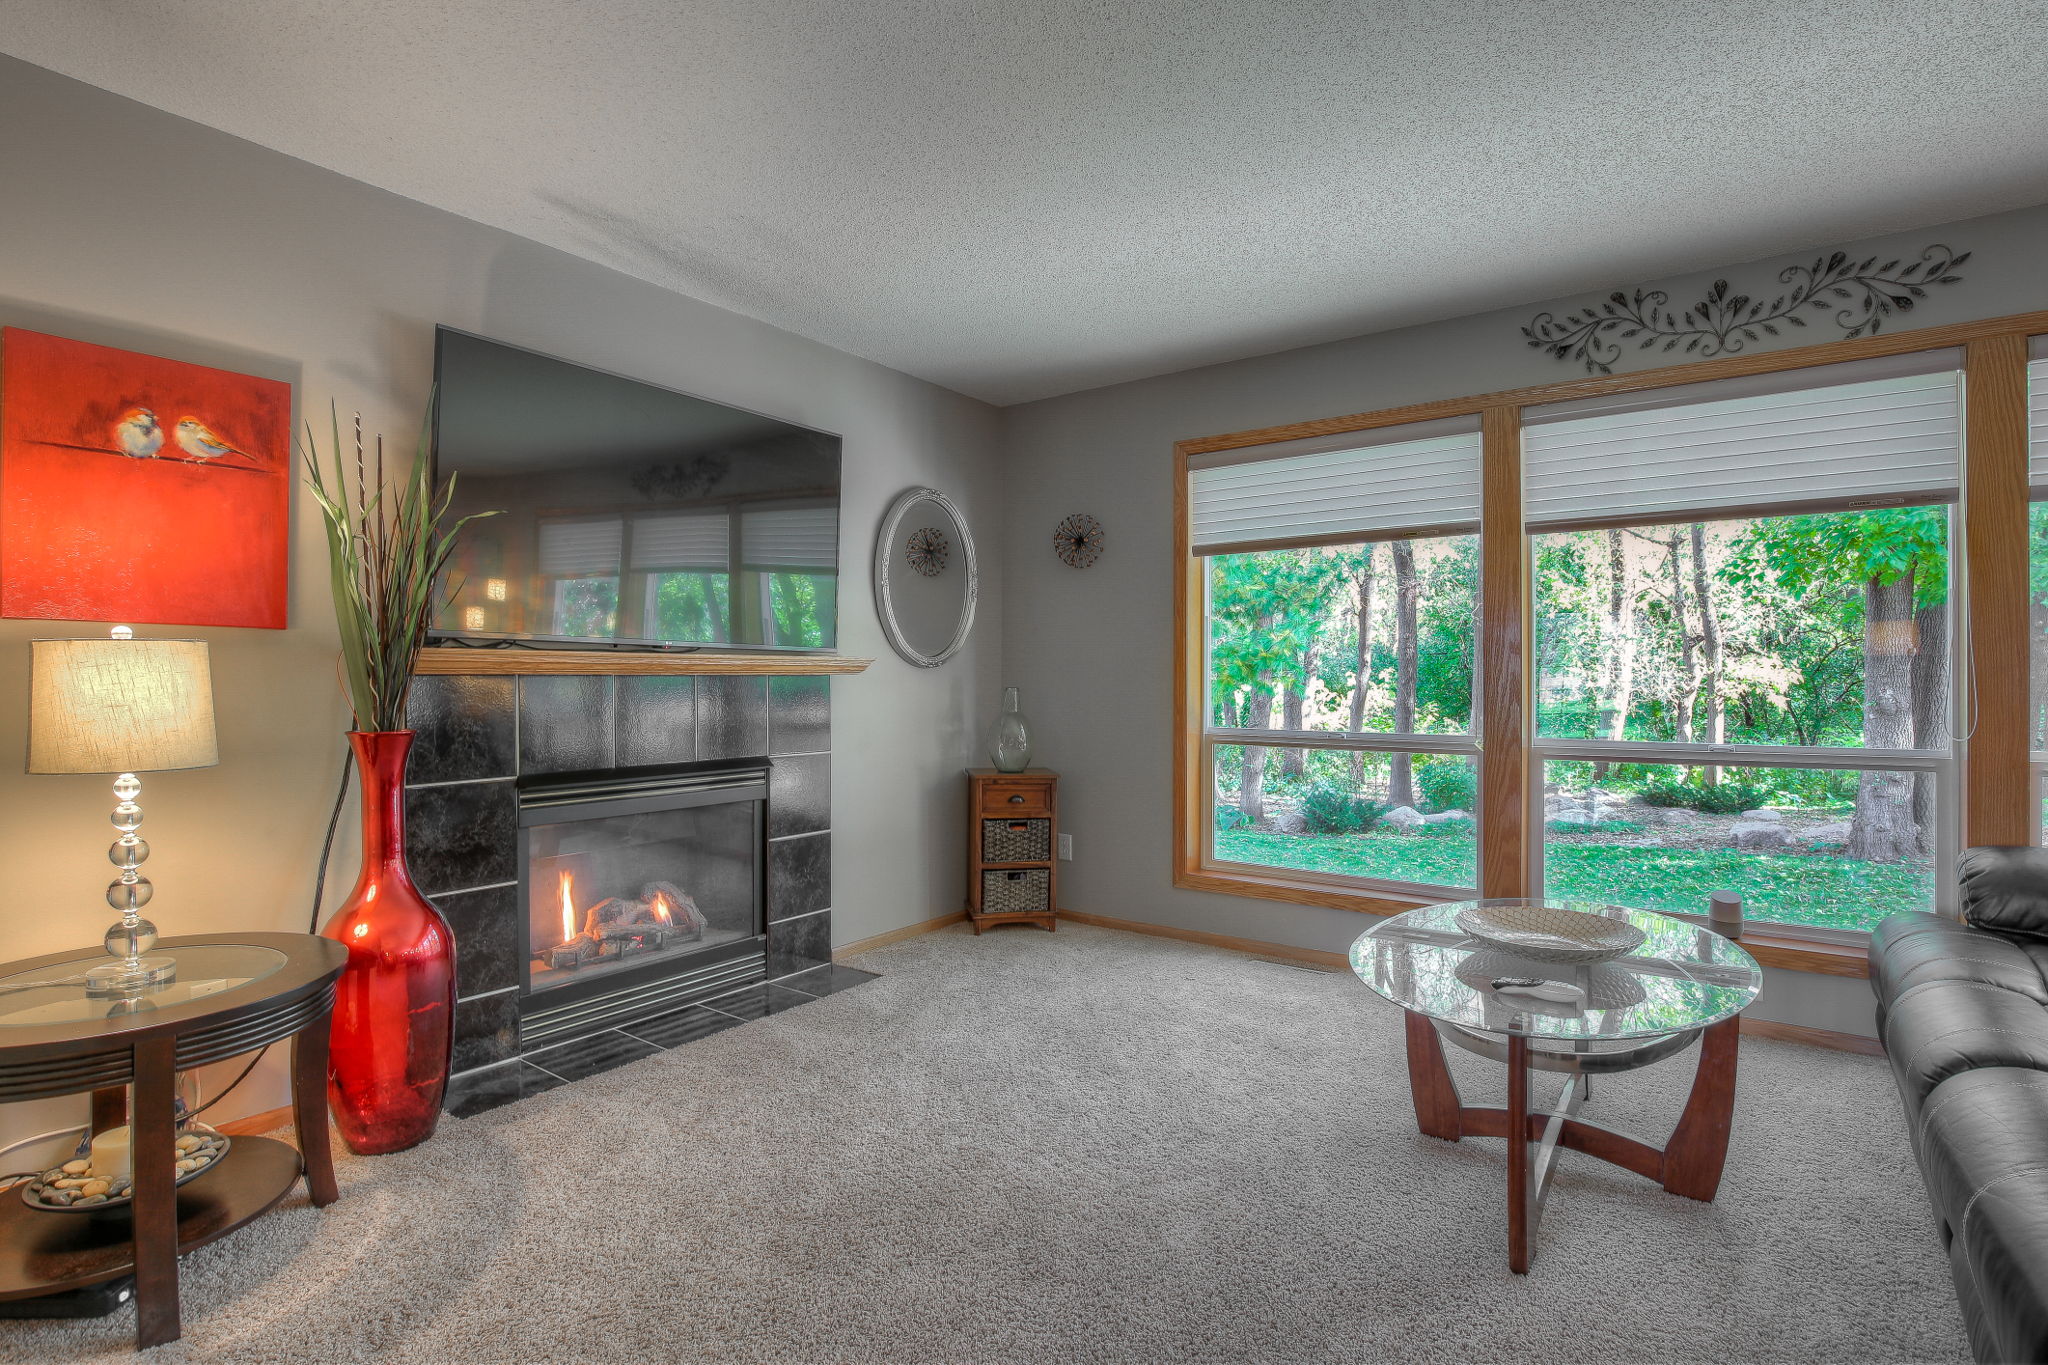 GREAT ROOM GAS FIREPLACE